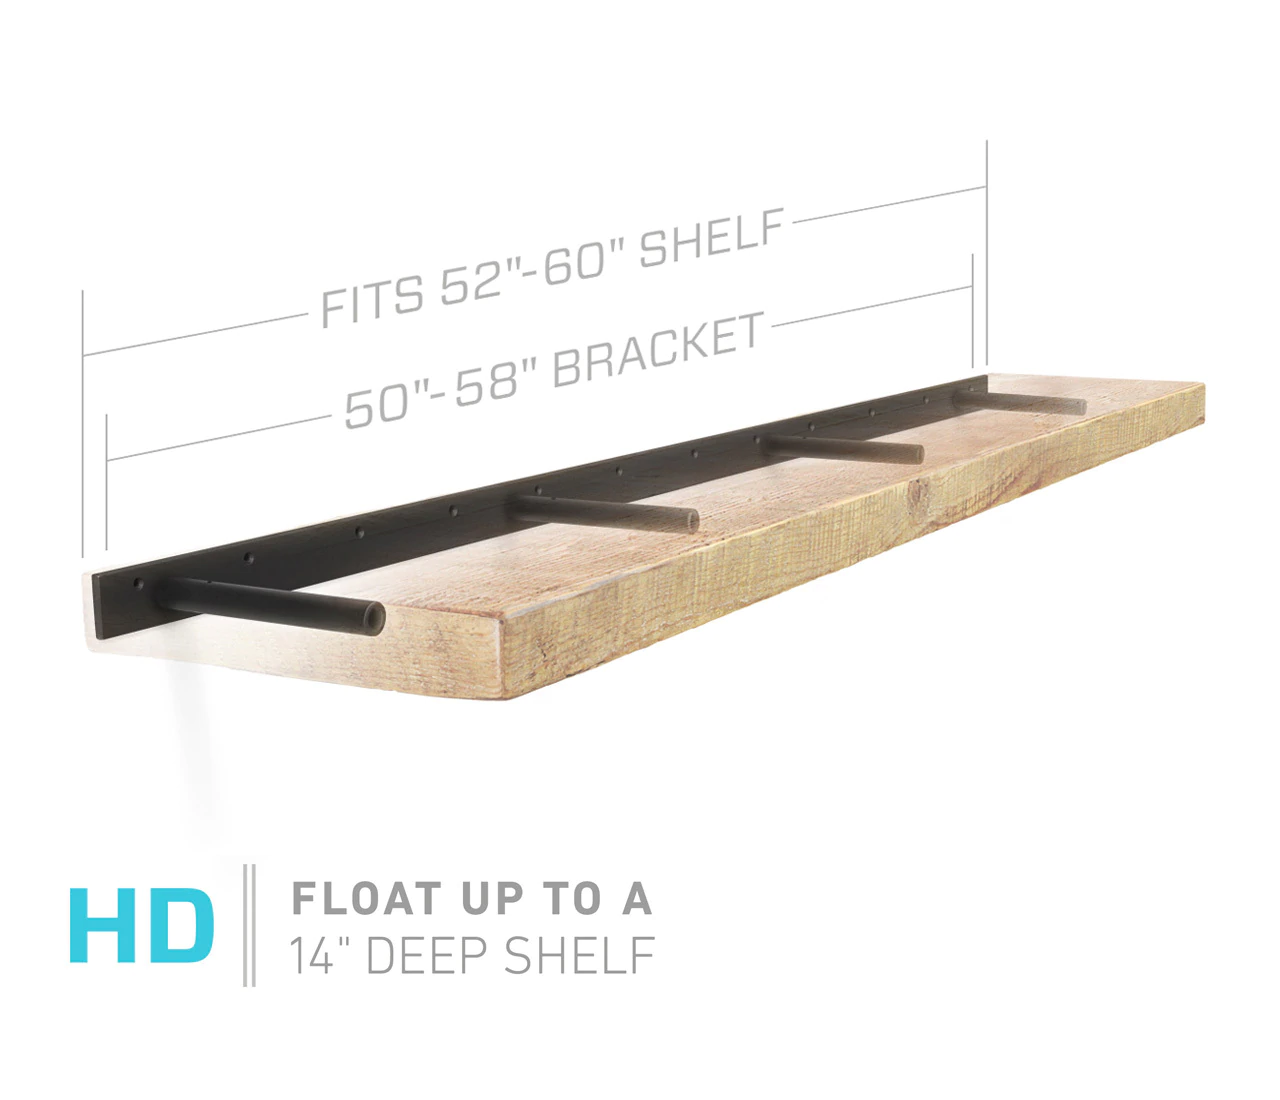 heavy duty floating shelf bracket fits inch shelves inches white brackets support through that are hanging bench for end king size ikea shoe drawer pairs black hallway storage